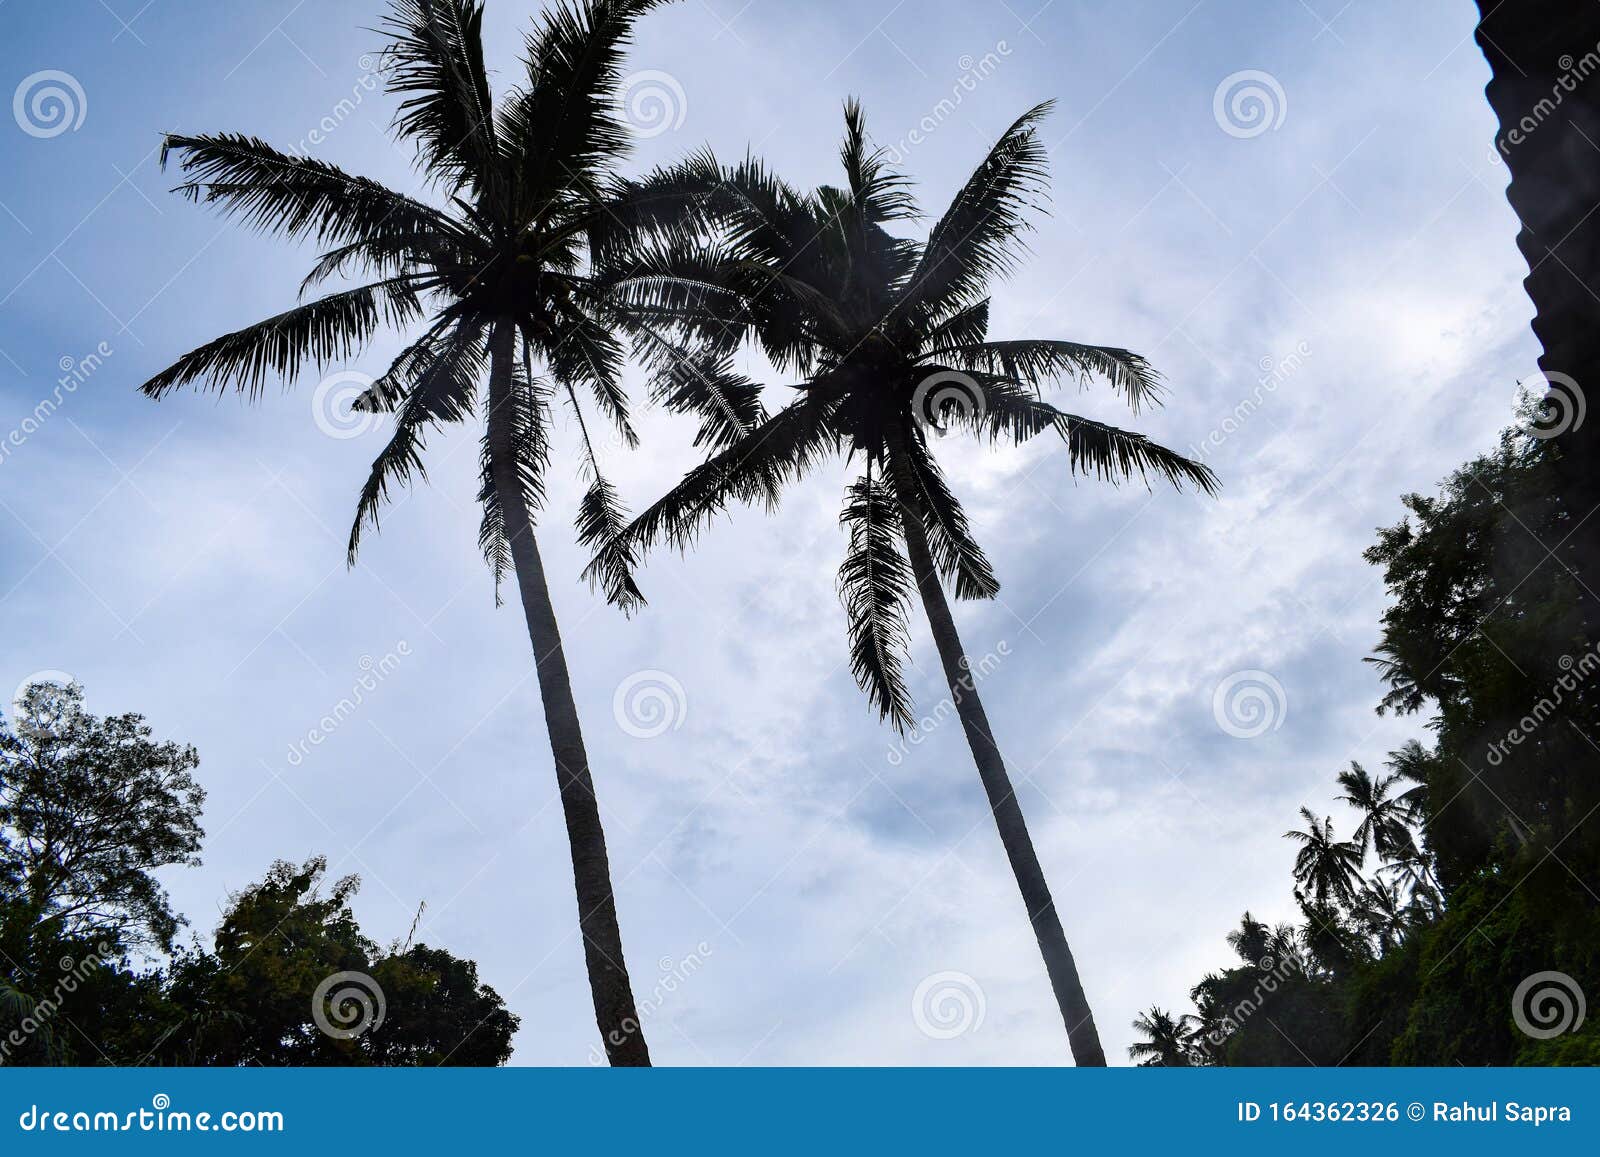 big coconut tree touching the blue sky, coconut tree in bali indonesia, bali coconut tree